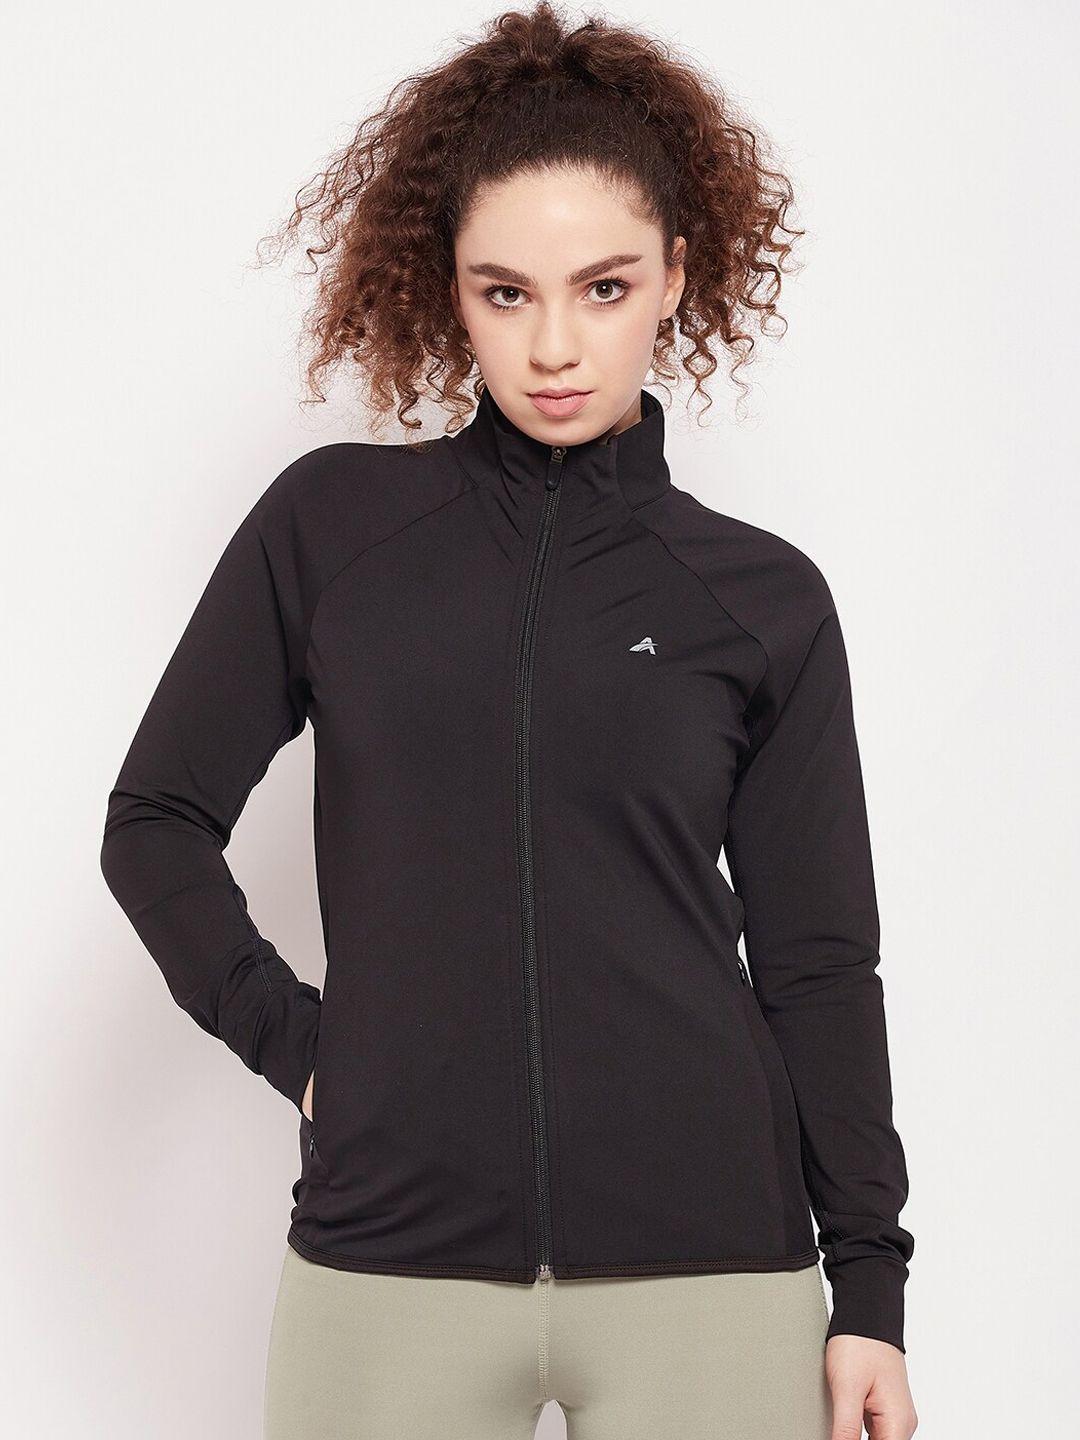 ATHLISIS Reflective Strip Mock Collar Long Sleeves Dry Fit Training or Gym Sporty Jacket